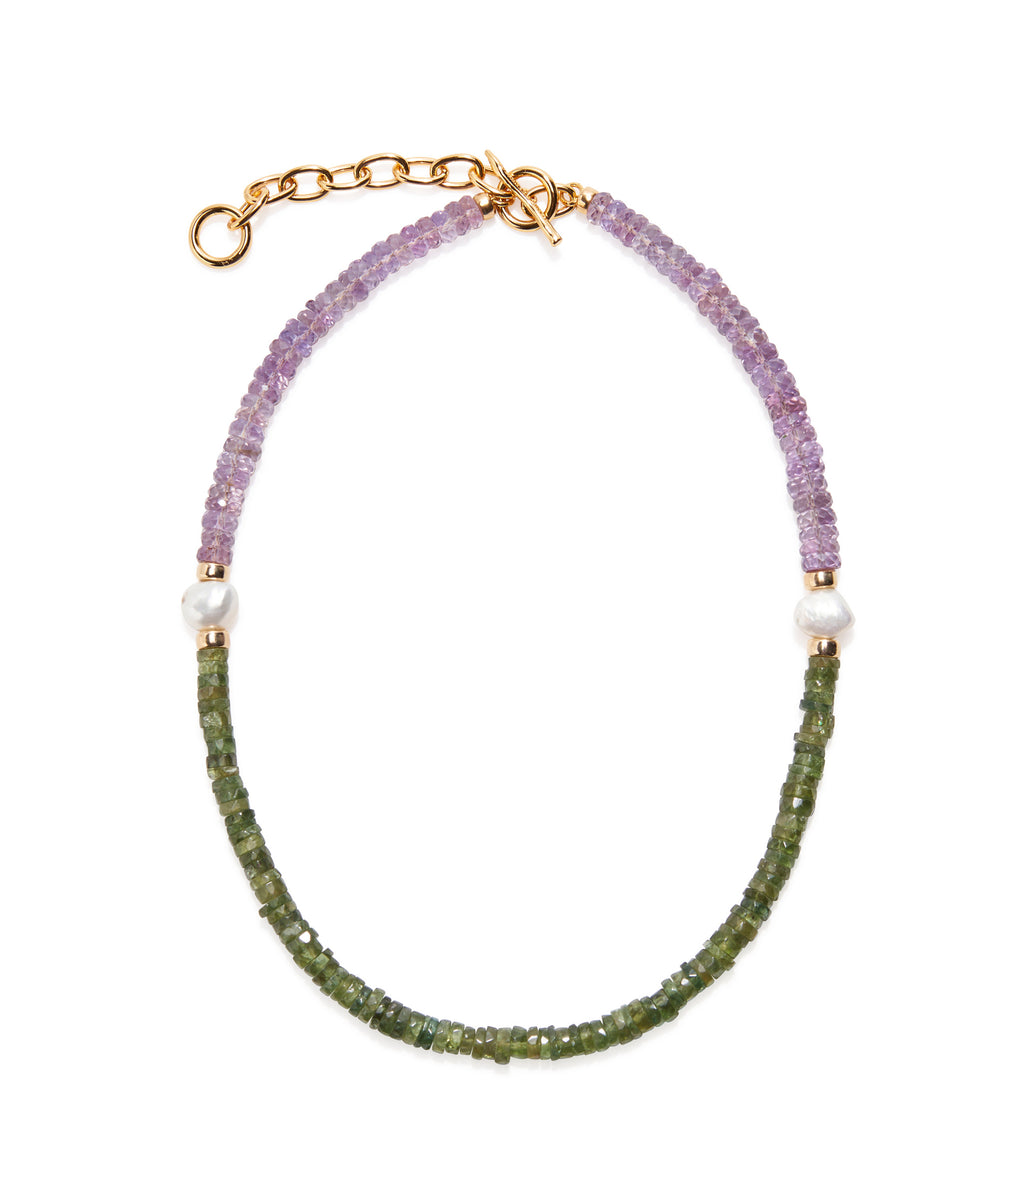 Rock Candy Necklace in African Violet | Lizzie Fortunato